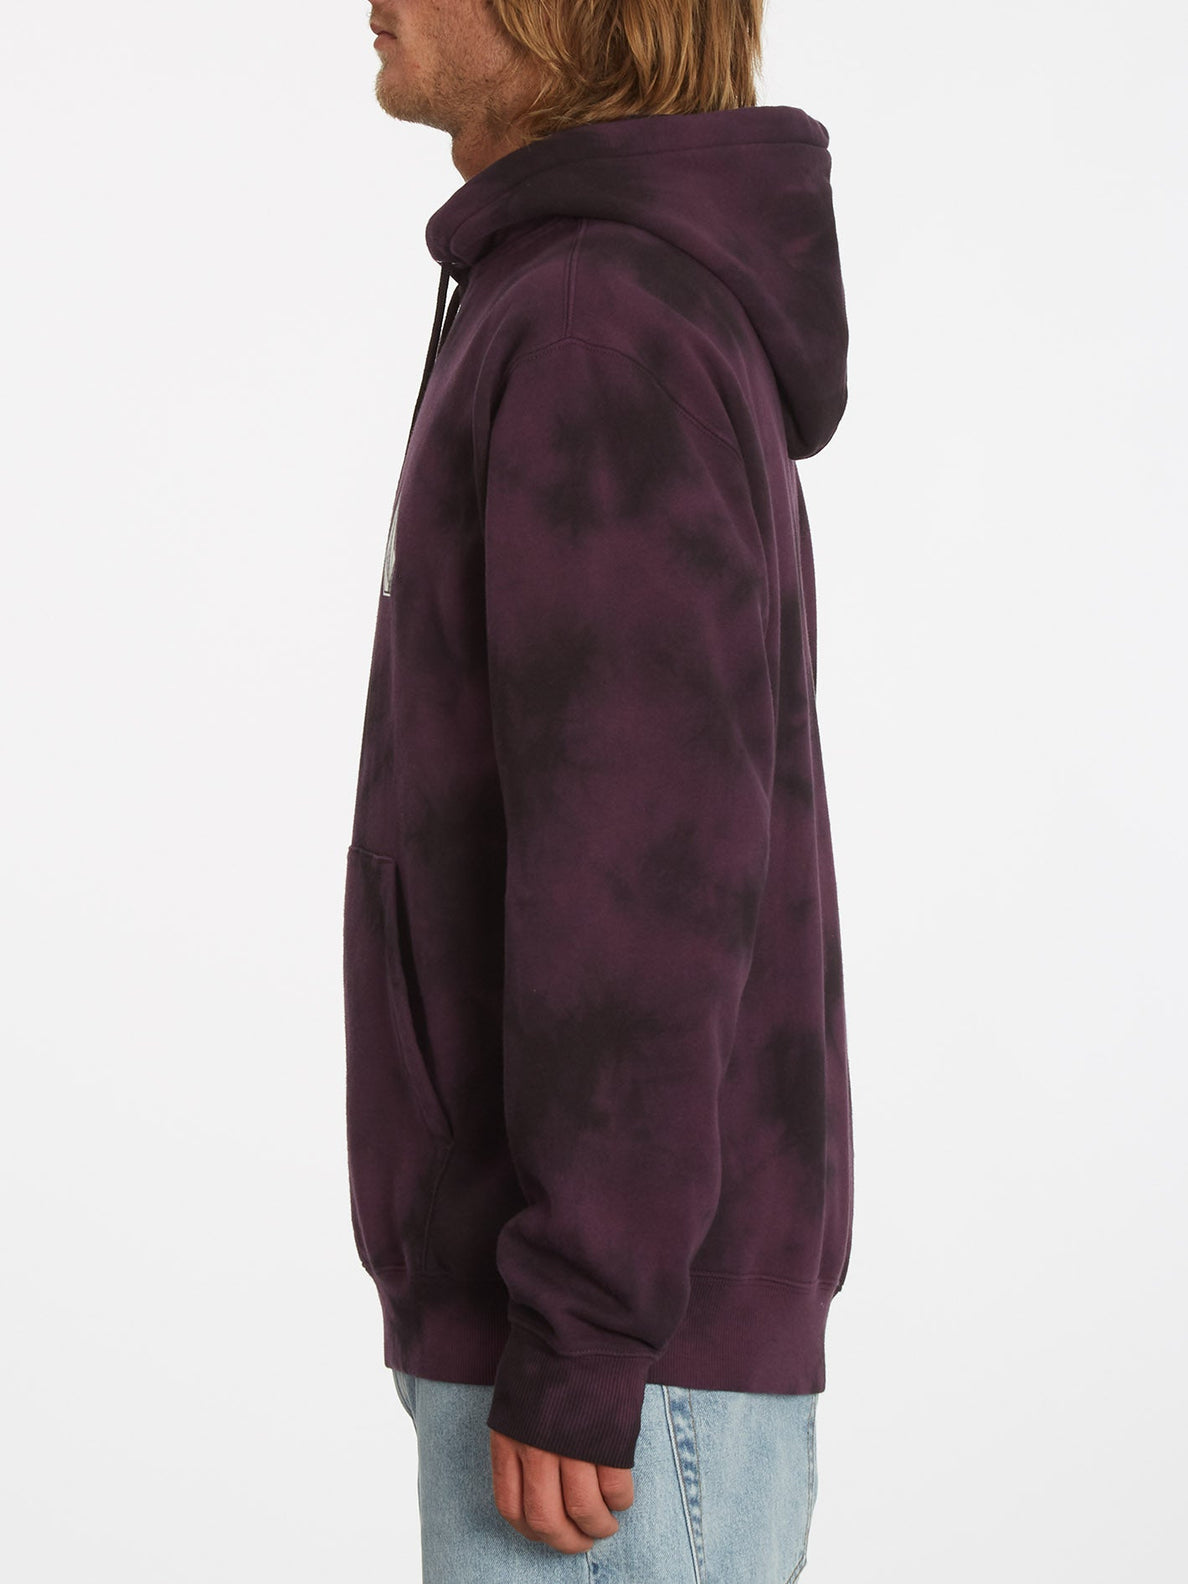 Iconic Stone Plus Hoodie - MULBERRY (A4132218_MUL) [3]